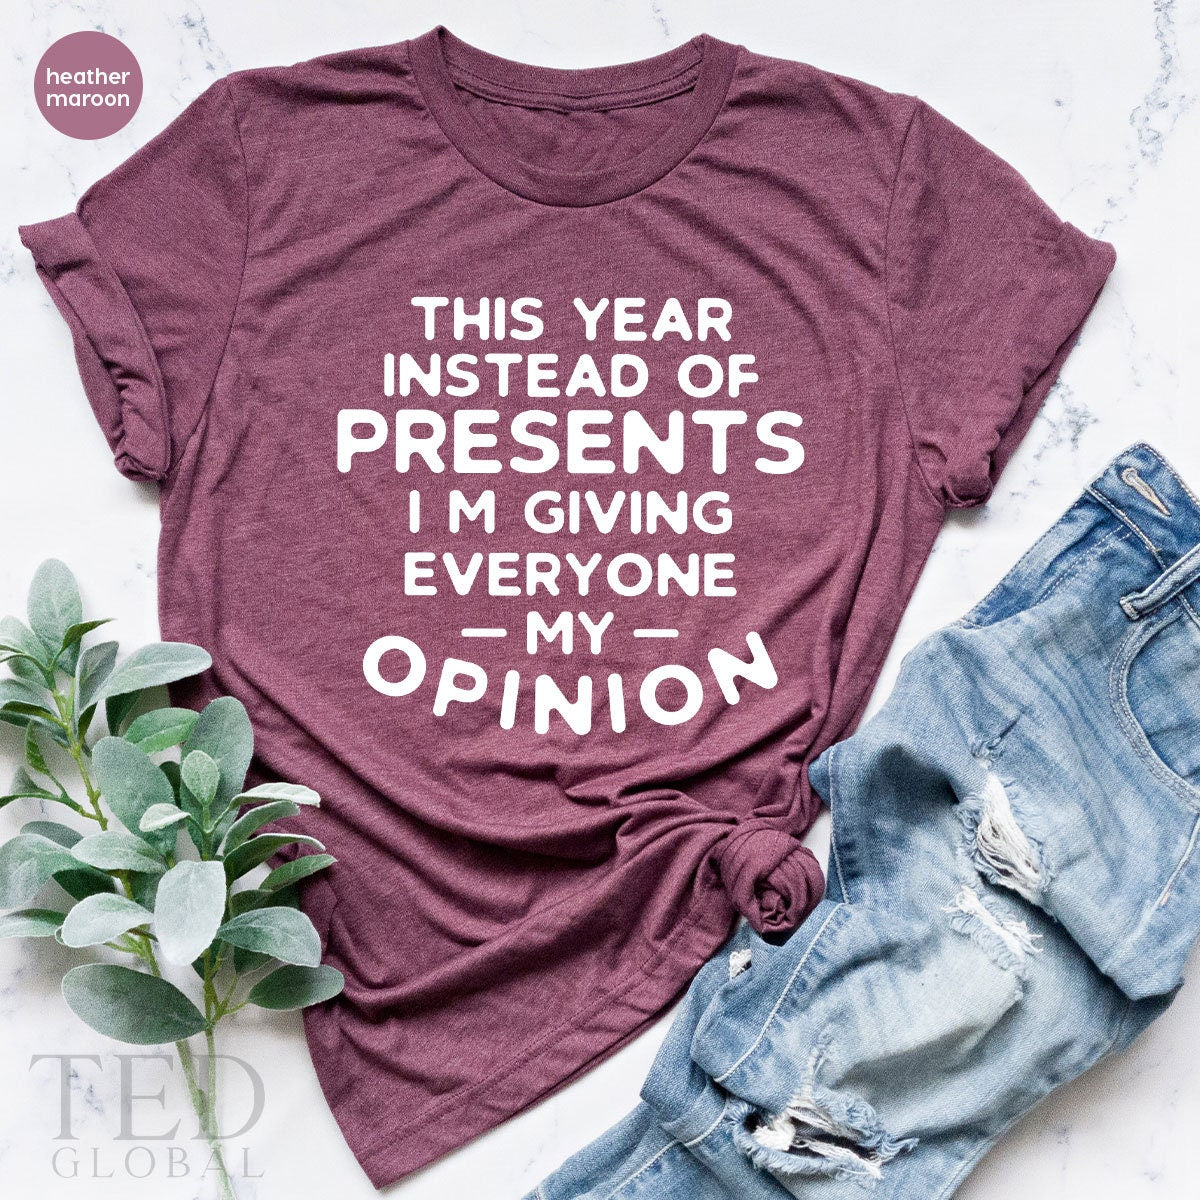 Cute Christmas Saying T-Shirt, This Year İnstead Of Presents Im Giving Everyone My Opinion Shirts, Sarcasm Xmas Shirts, Gift For Christmas - Fastdeliverytees.com